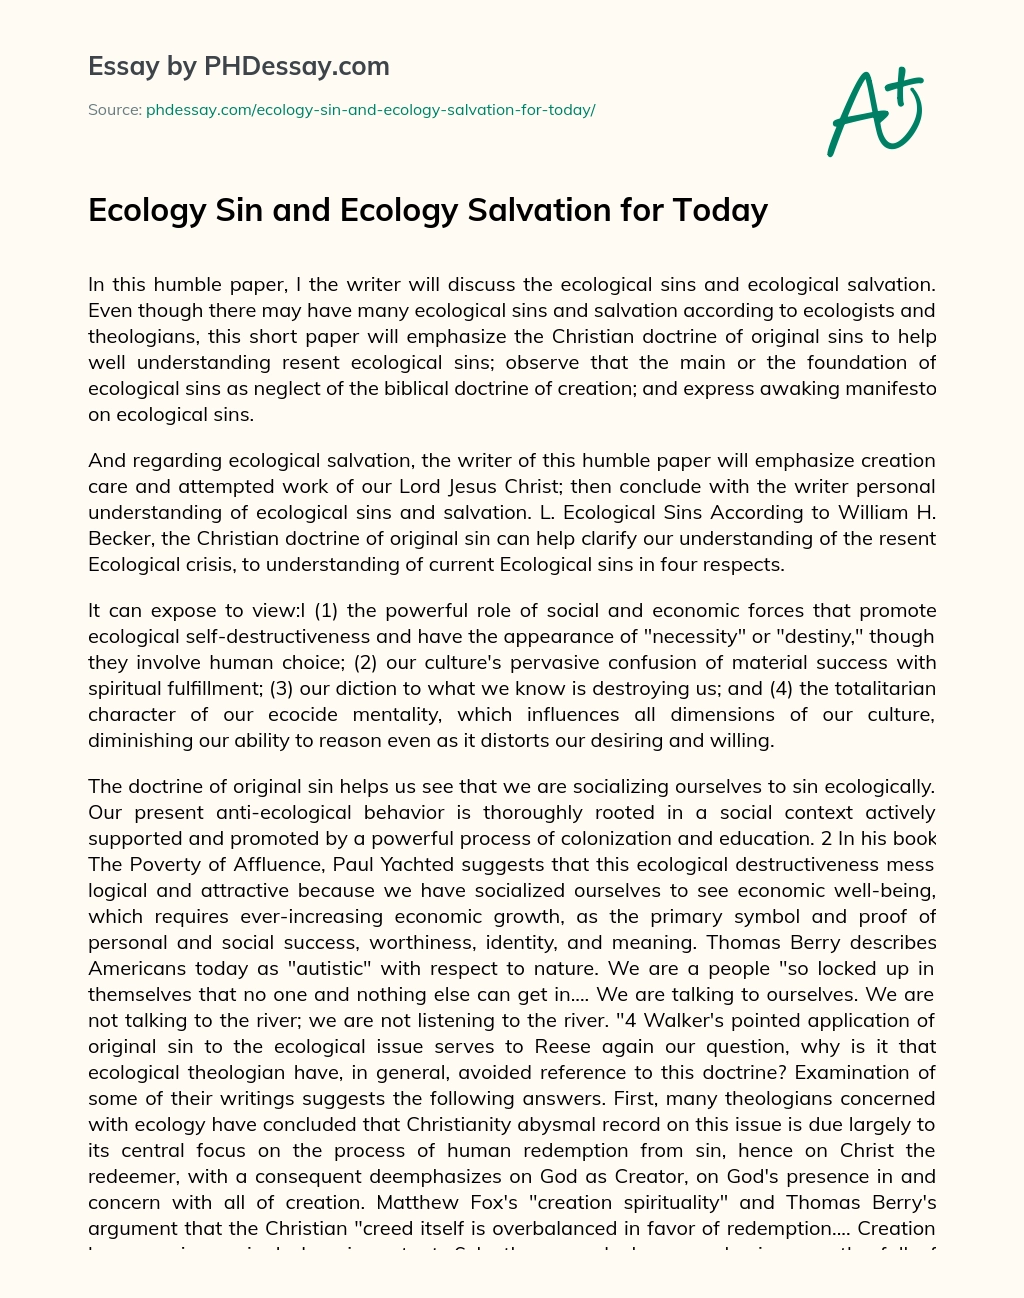 Ecology Sin and Ecology Salvation for Today essay